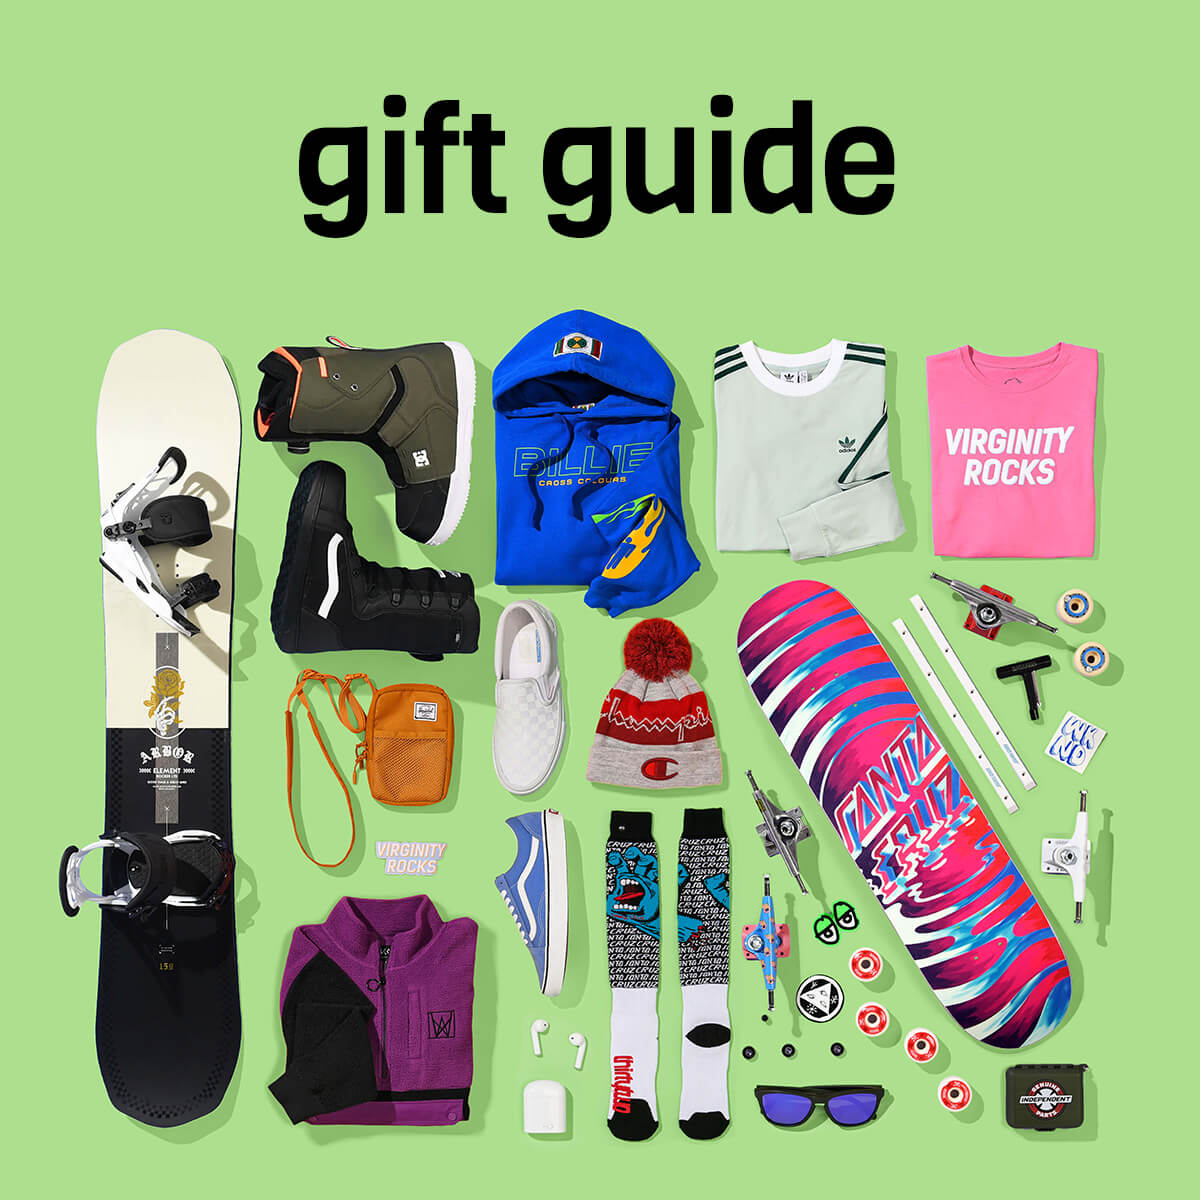 SHOP THE HOLIDAY GIFT GUIDE FOR THE SEASONS BEST GIFT IDEAS